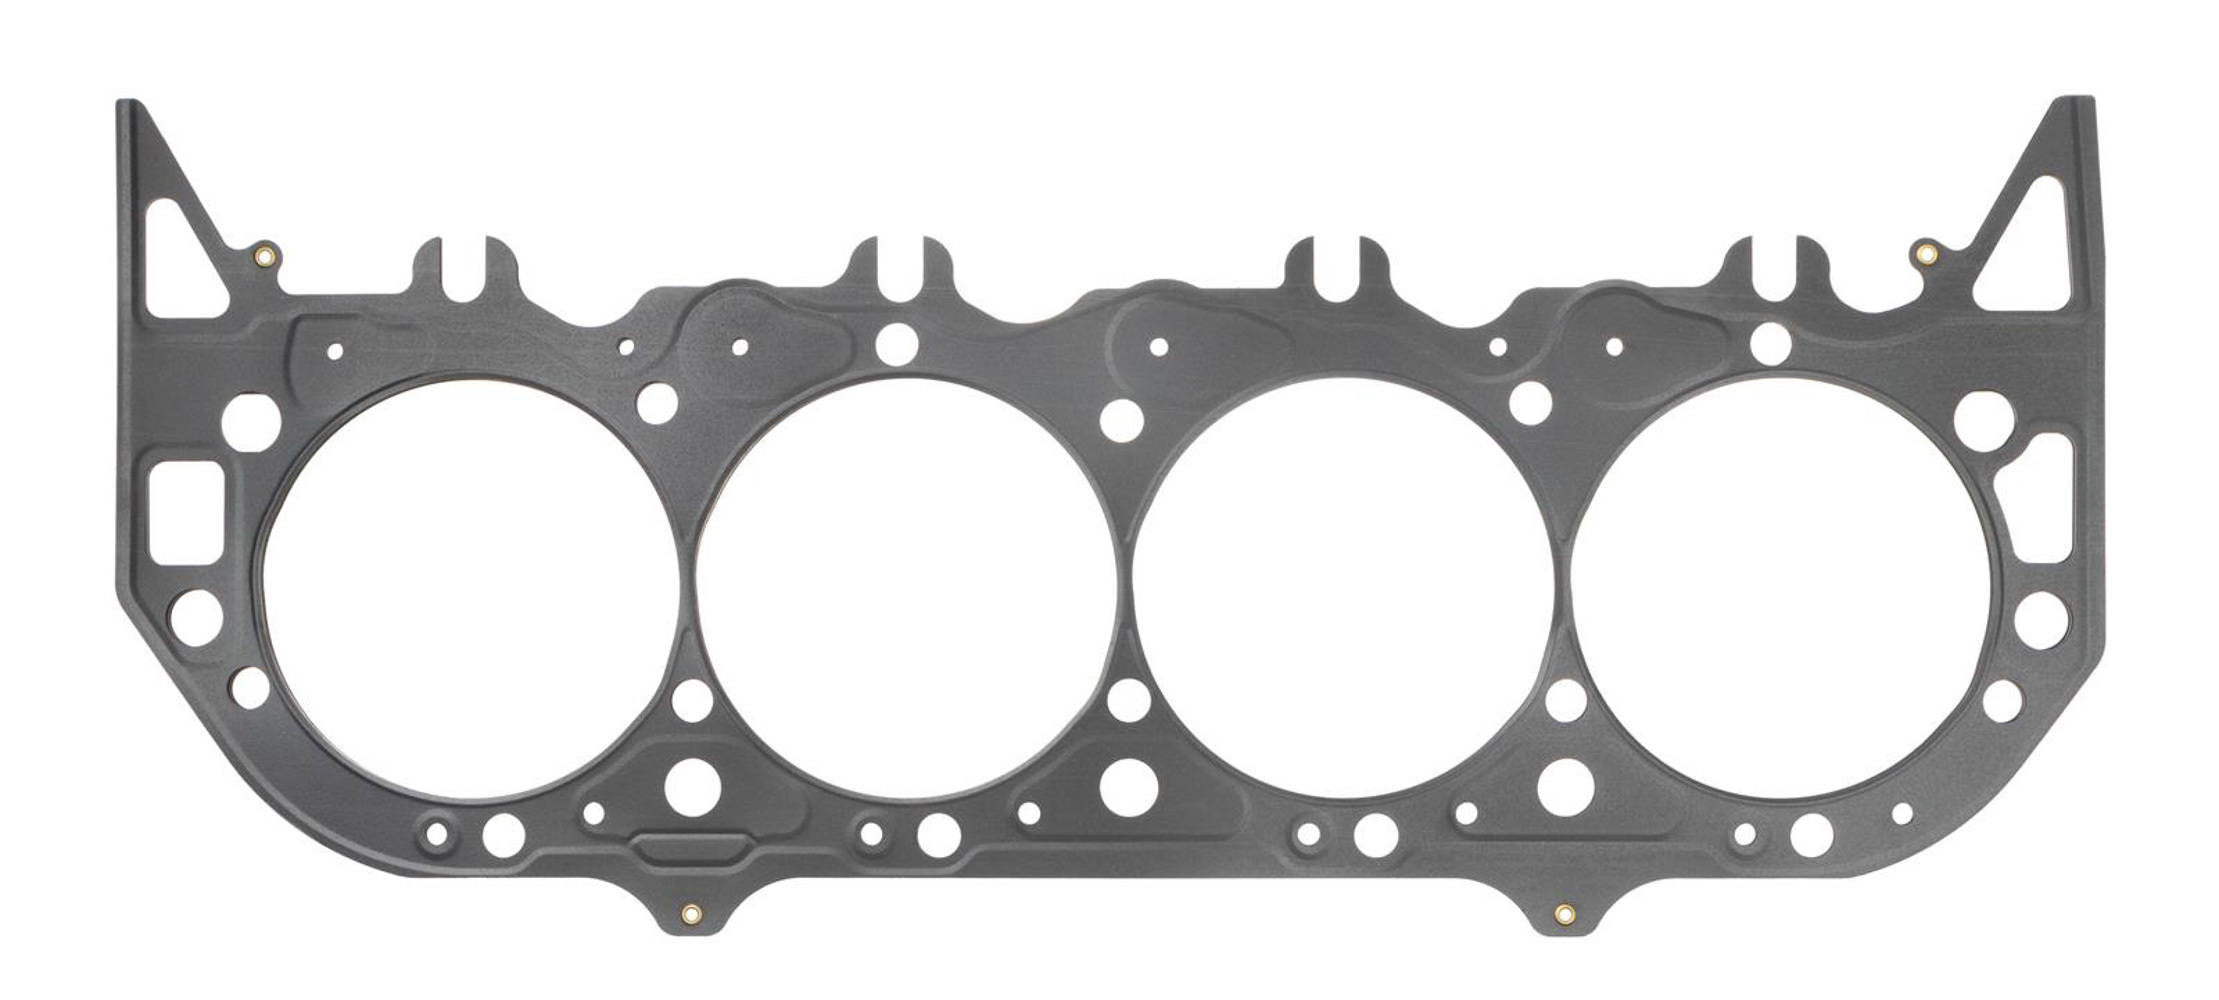 SCE Gaskets M136351 - Cylinder Head Gasket, MLS Spartan, 4.630 in Bore, 0.051 in Compression Thickness, Multi-Layer Steel, Big Block Chevy, Each